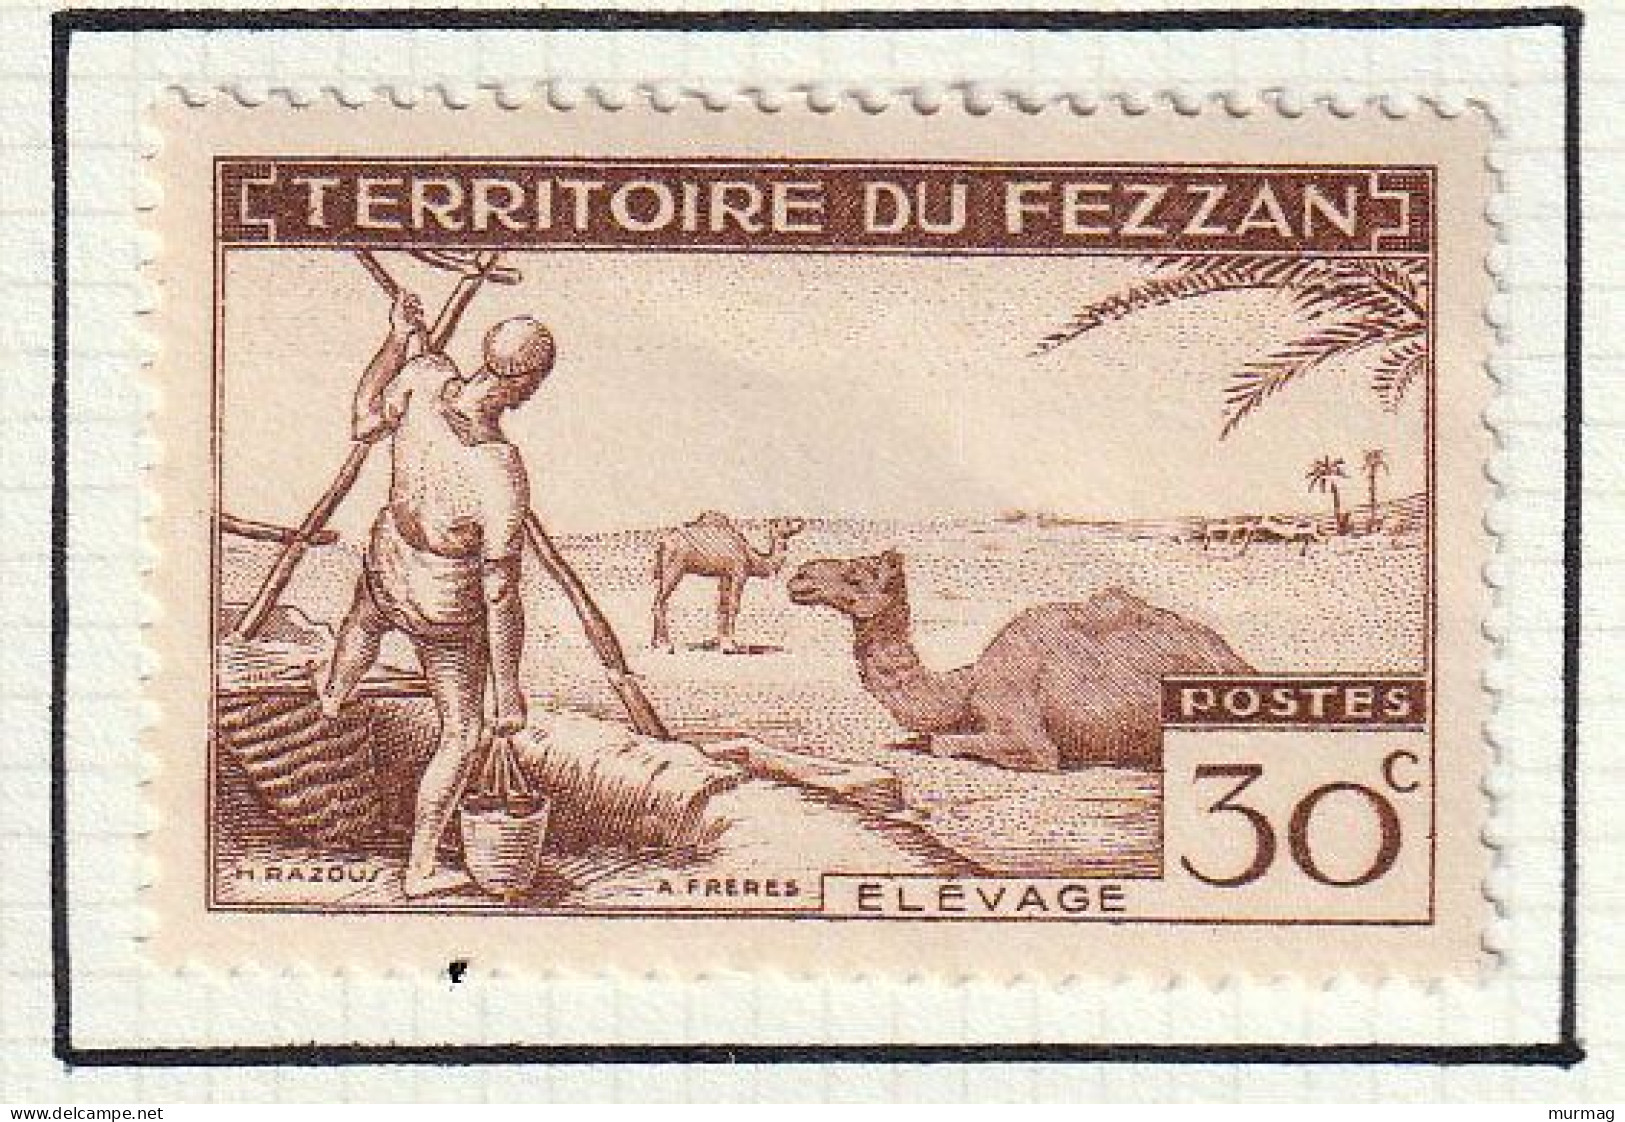 FEZZAN - Elevage, Chameaux - Y&T N° 56 - 1951 - MH - Unused Stamps